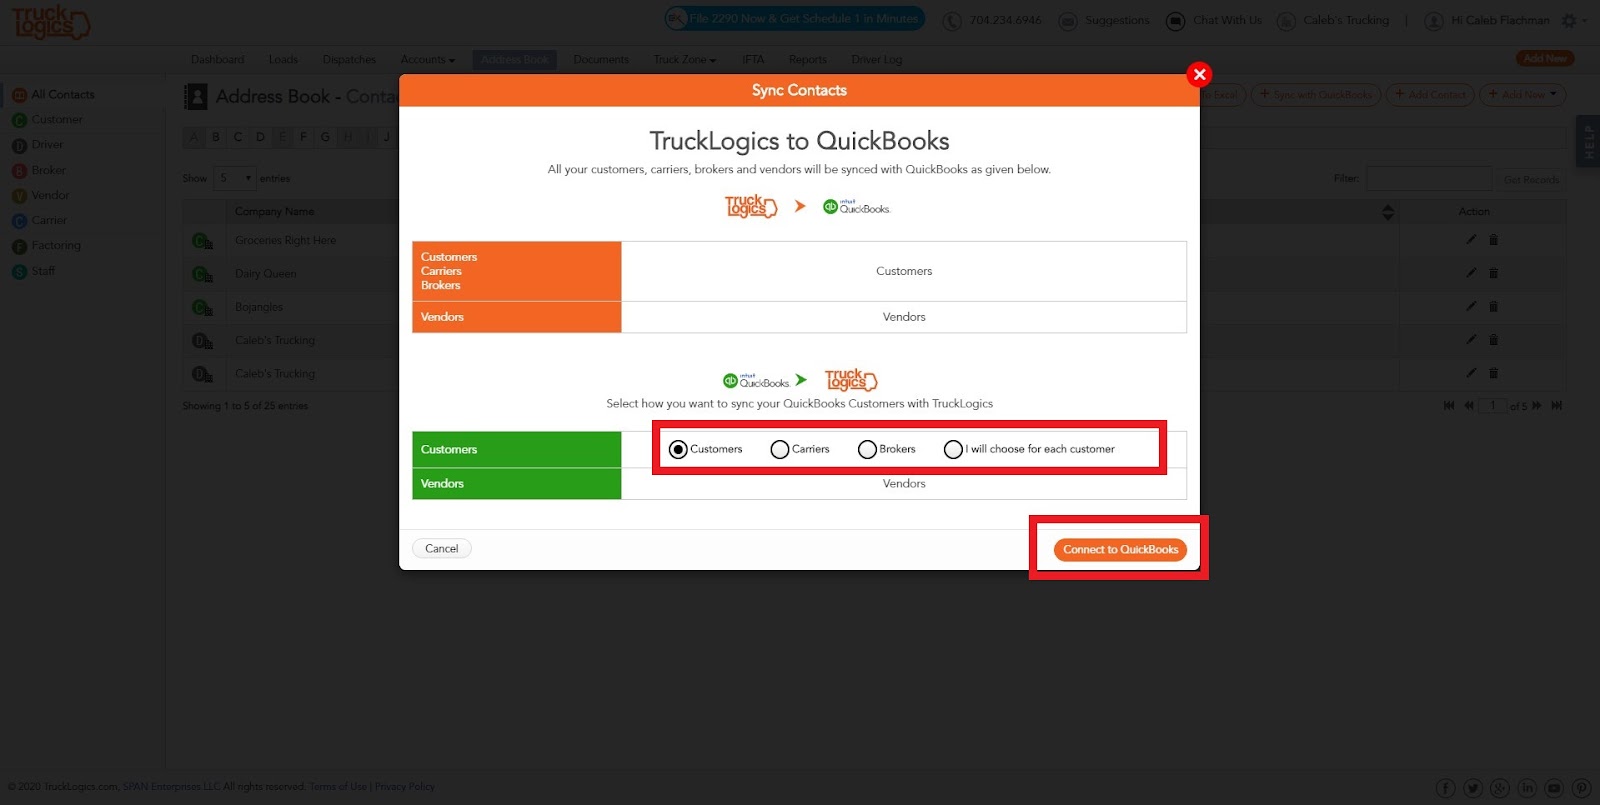 How to use QuickBooks and TruckLogics.